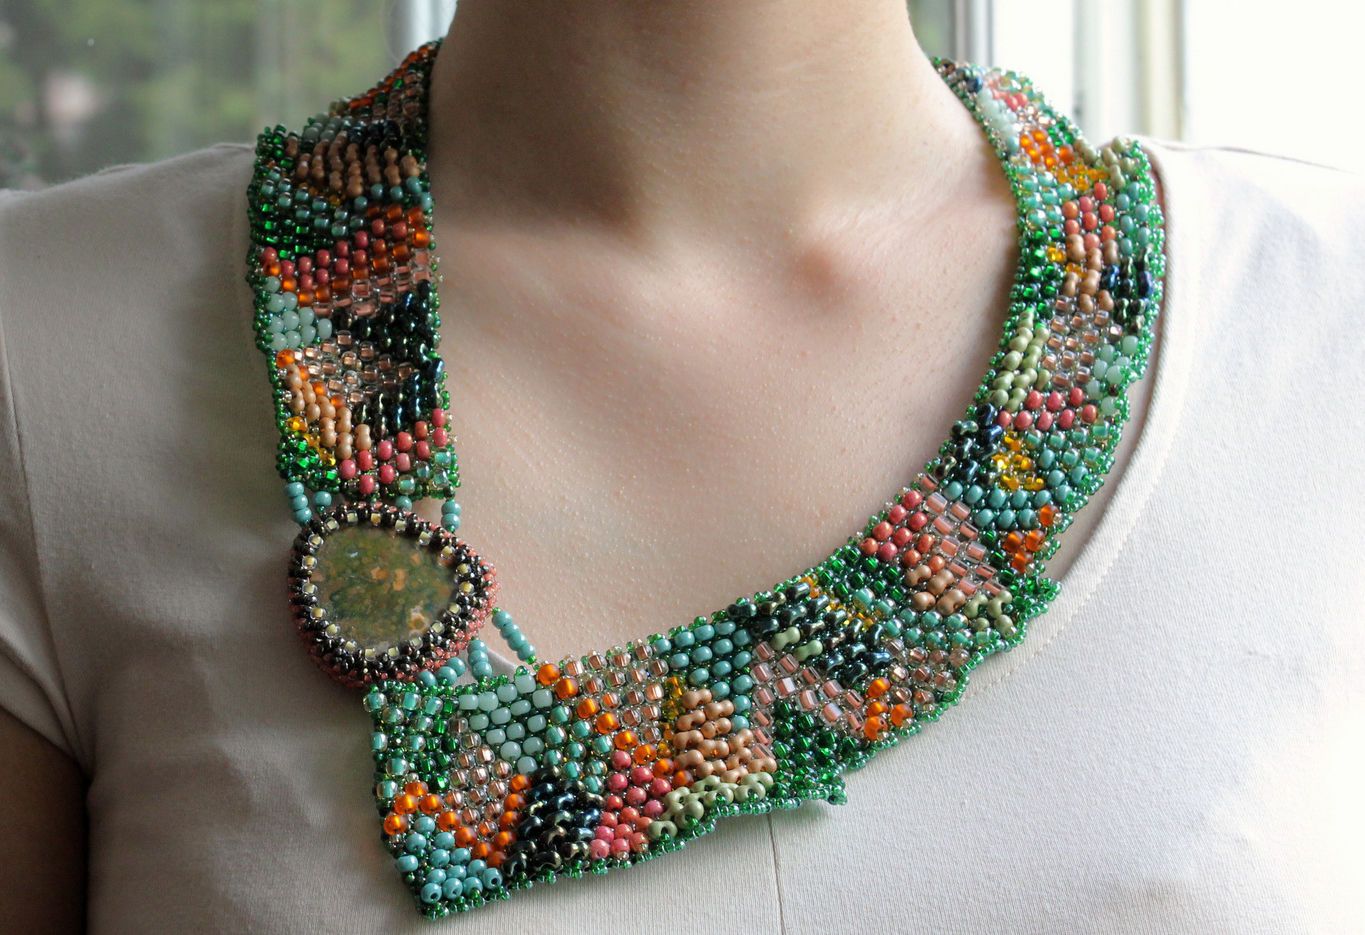 Beaded necklace-collar photo 4